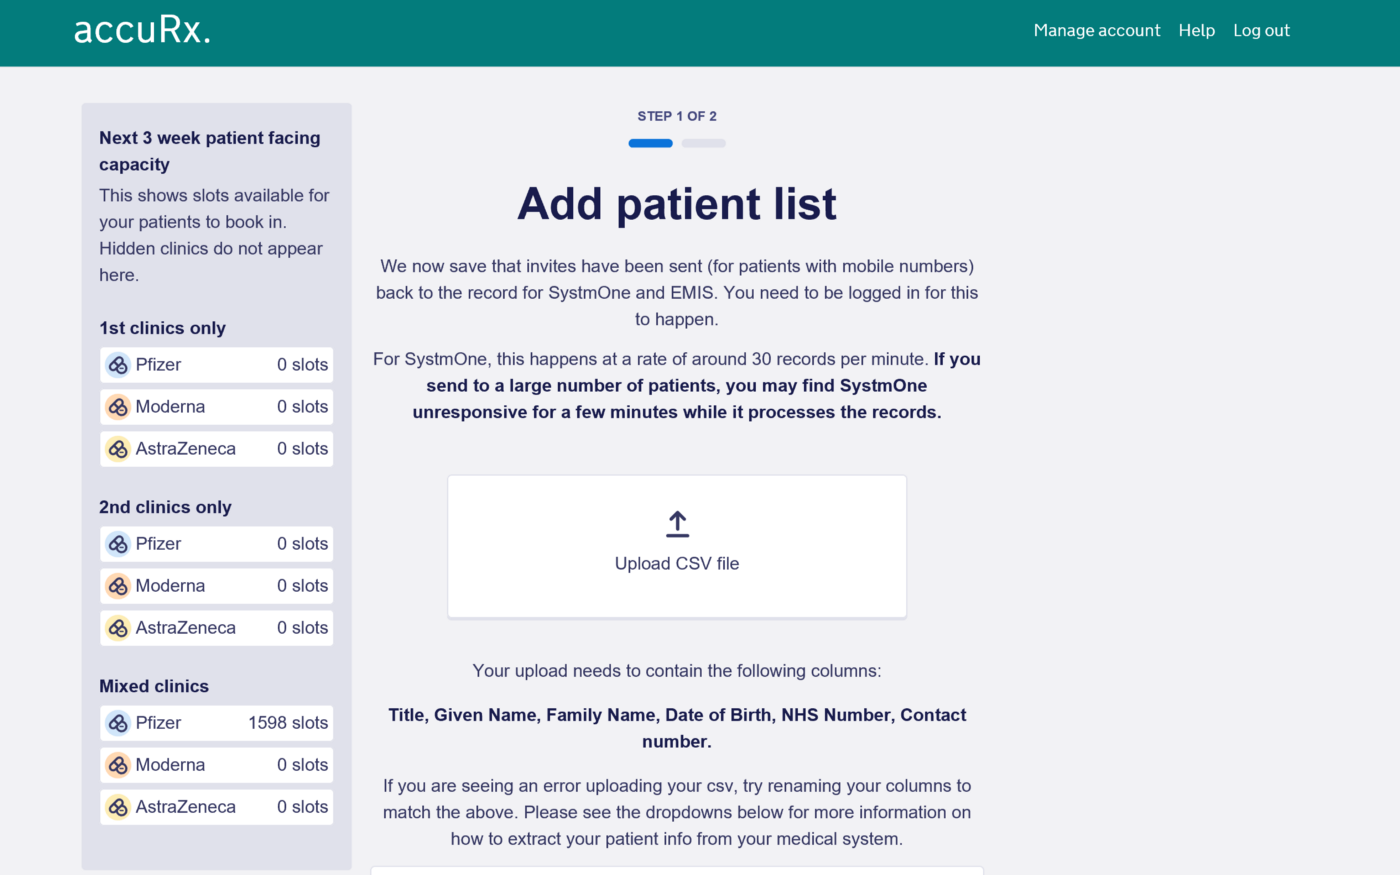 Screenshot of a two-column layout in a product — a main section with text and an upload button, and a sidebar with appointment information